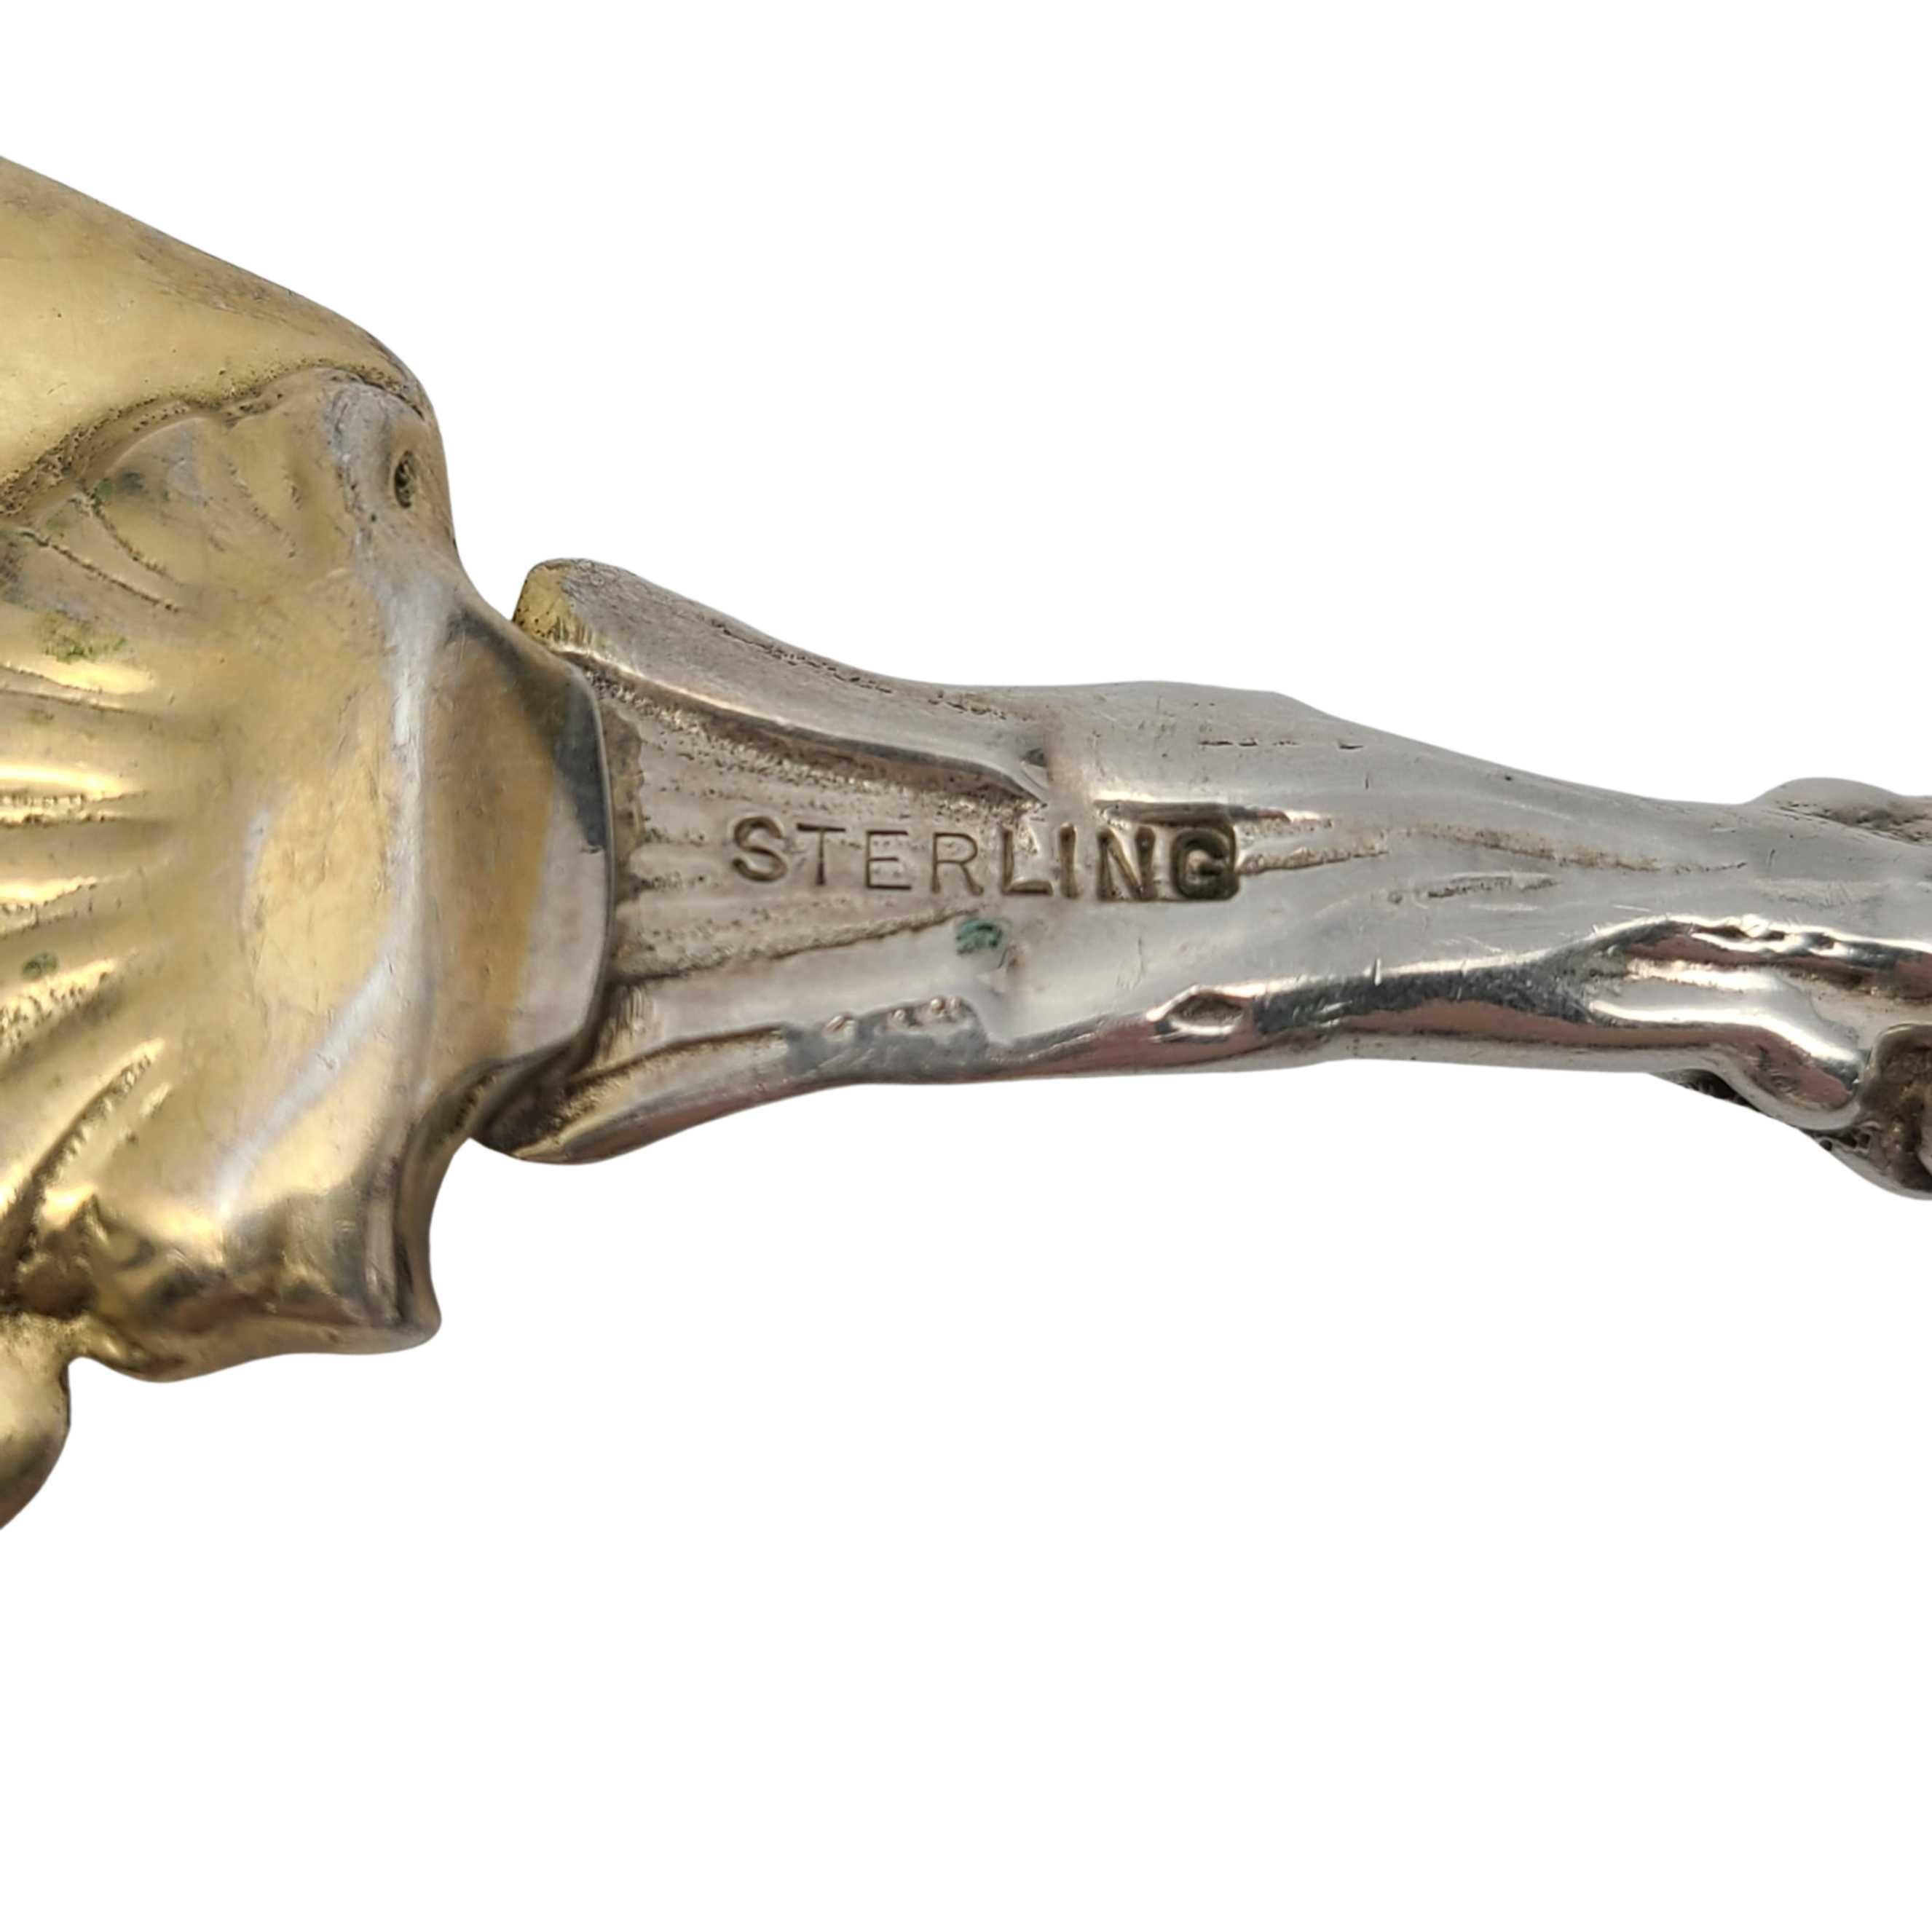 Antique Art Nouveau Sterling Silver Fish Server with Gold Wash Blade For Sale 3